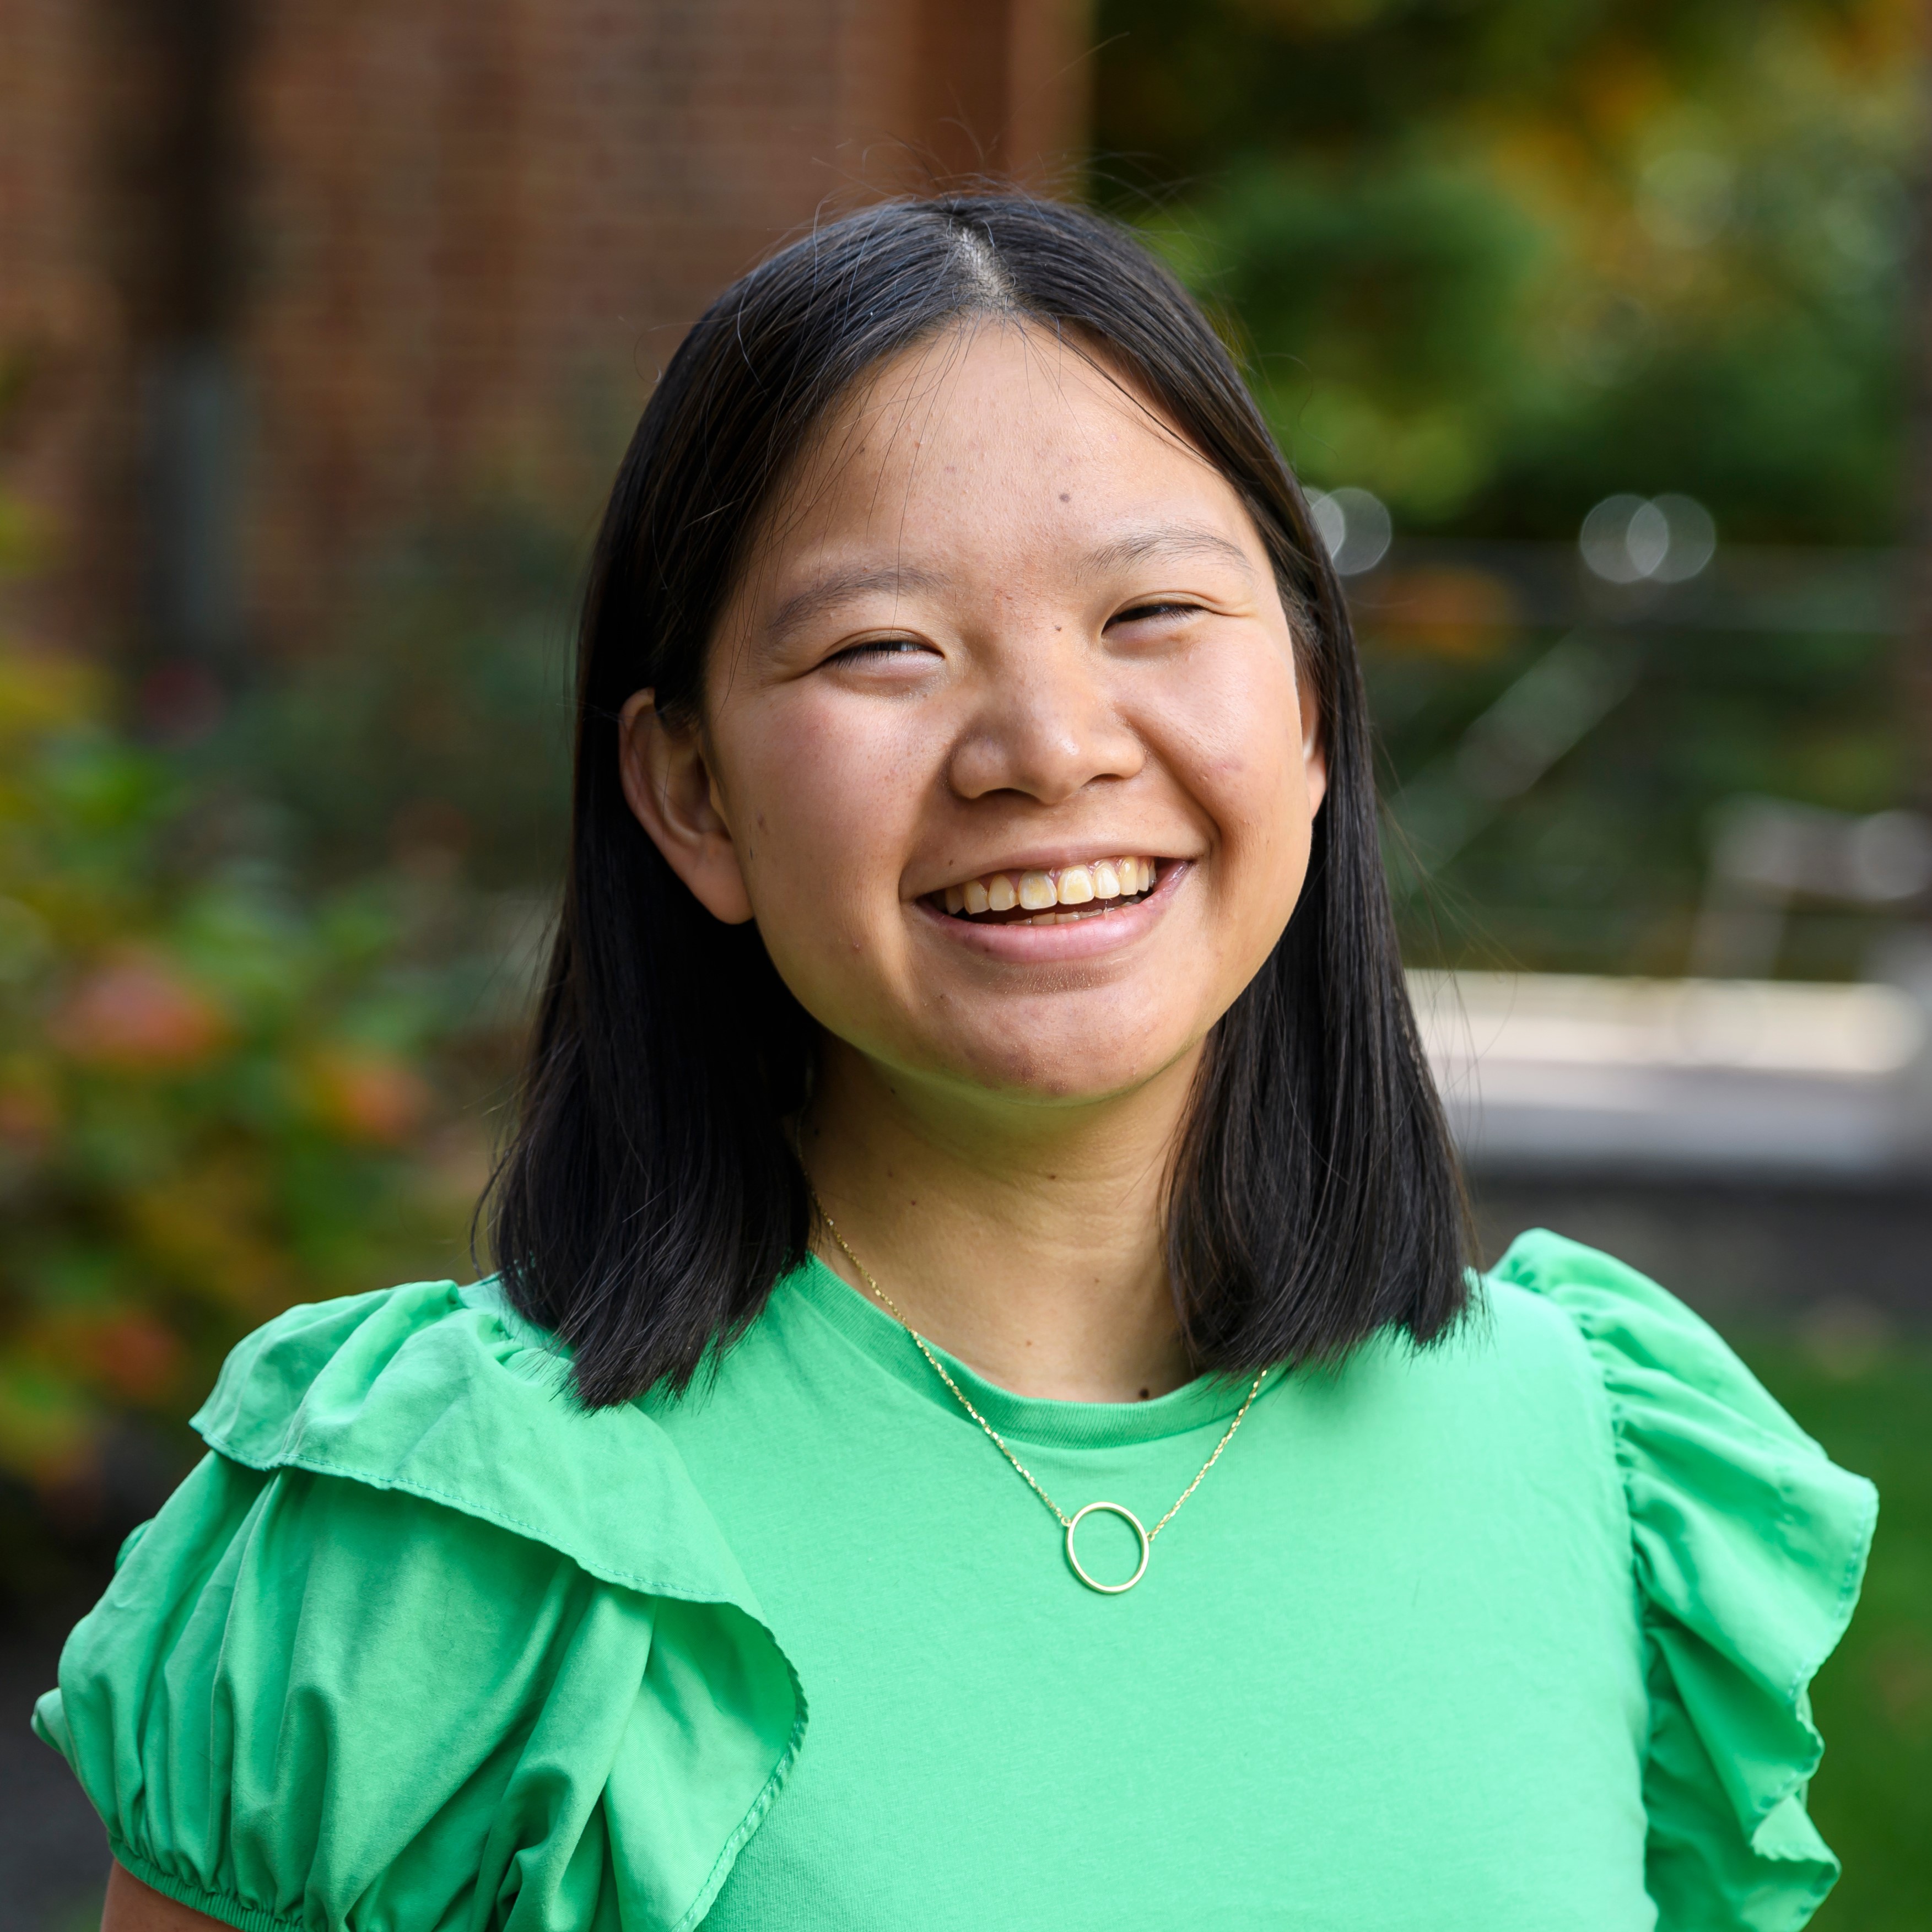 Female, Asian descent, with black short hair, smiling, wearing a green short sleeved shirt, necklace, outside blurred background.